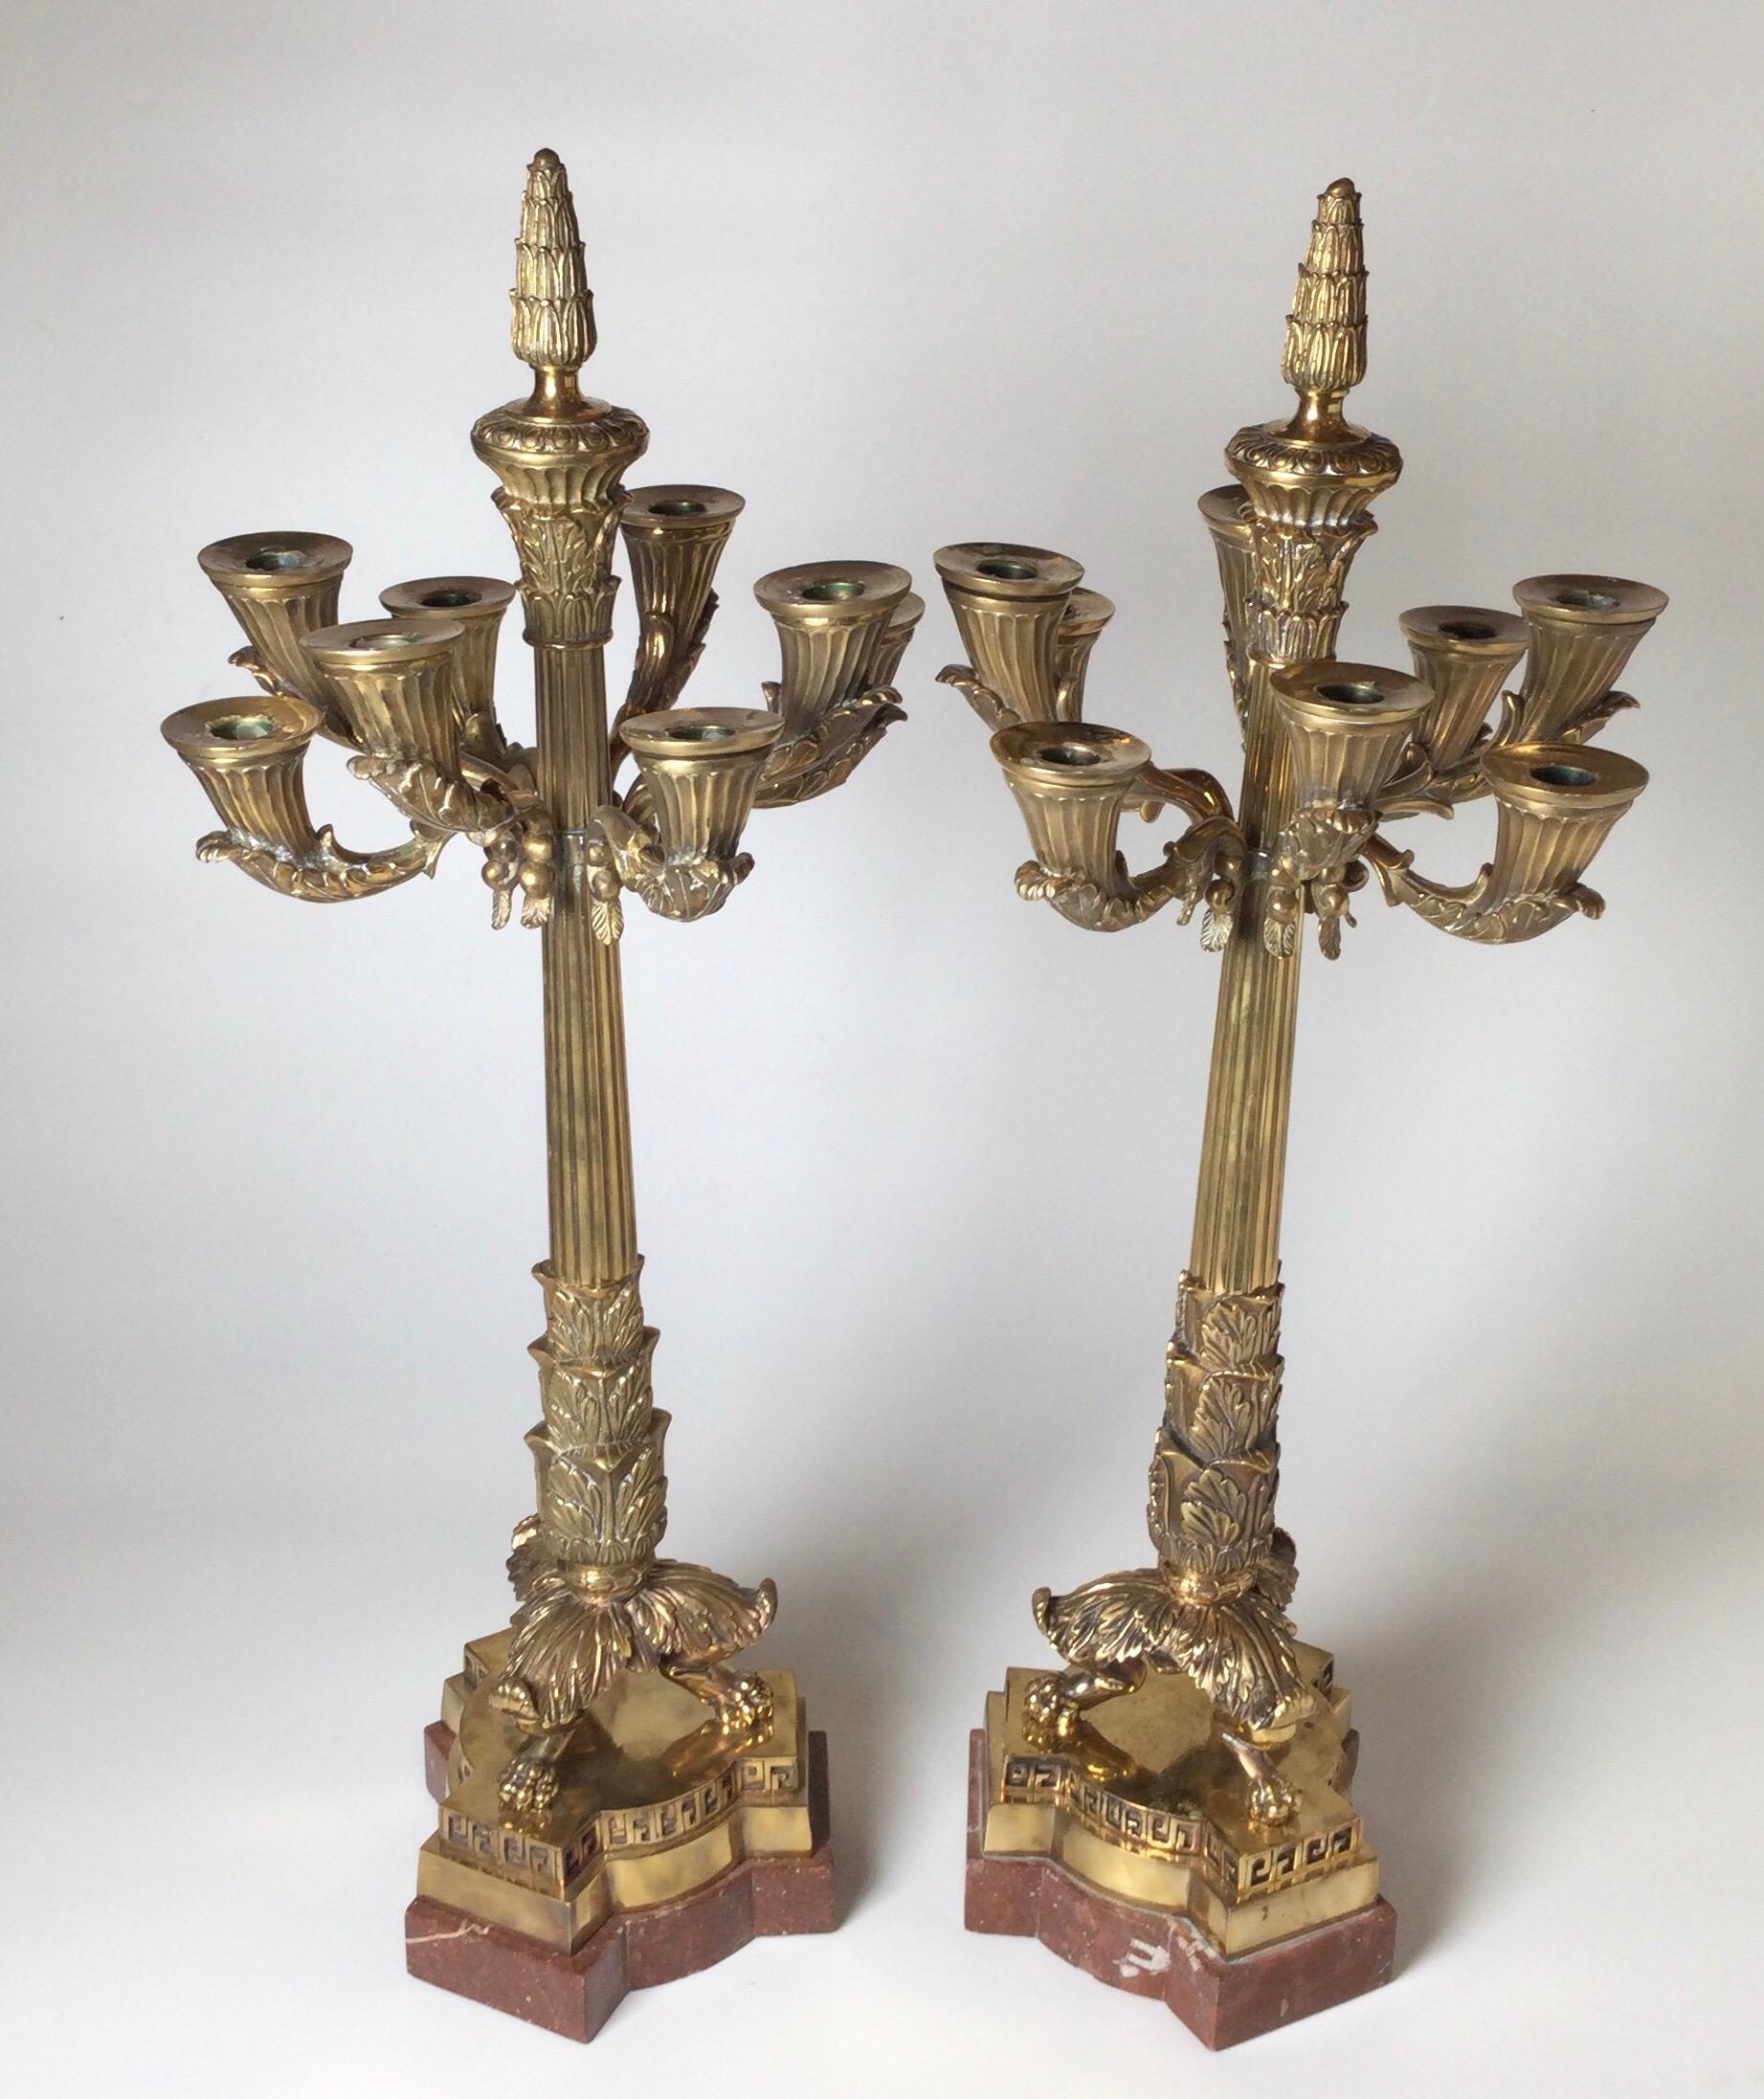 A pair of 8 arm polished bronze Charles X style candelabra with rouge marble bases. The cast arms and center column with tripod paw feet on marble base. One arm has been reattached.